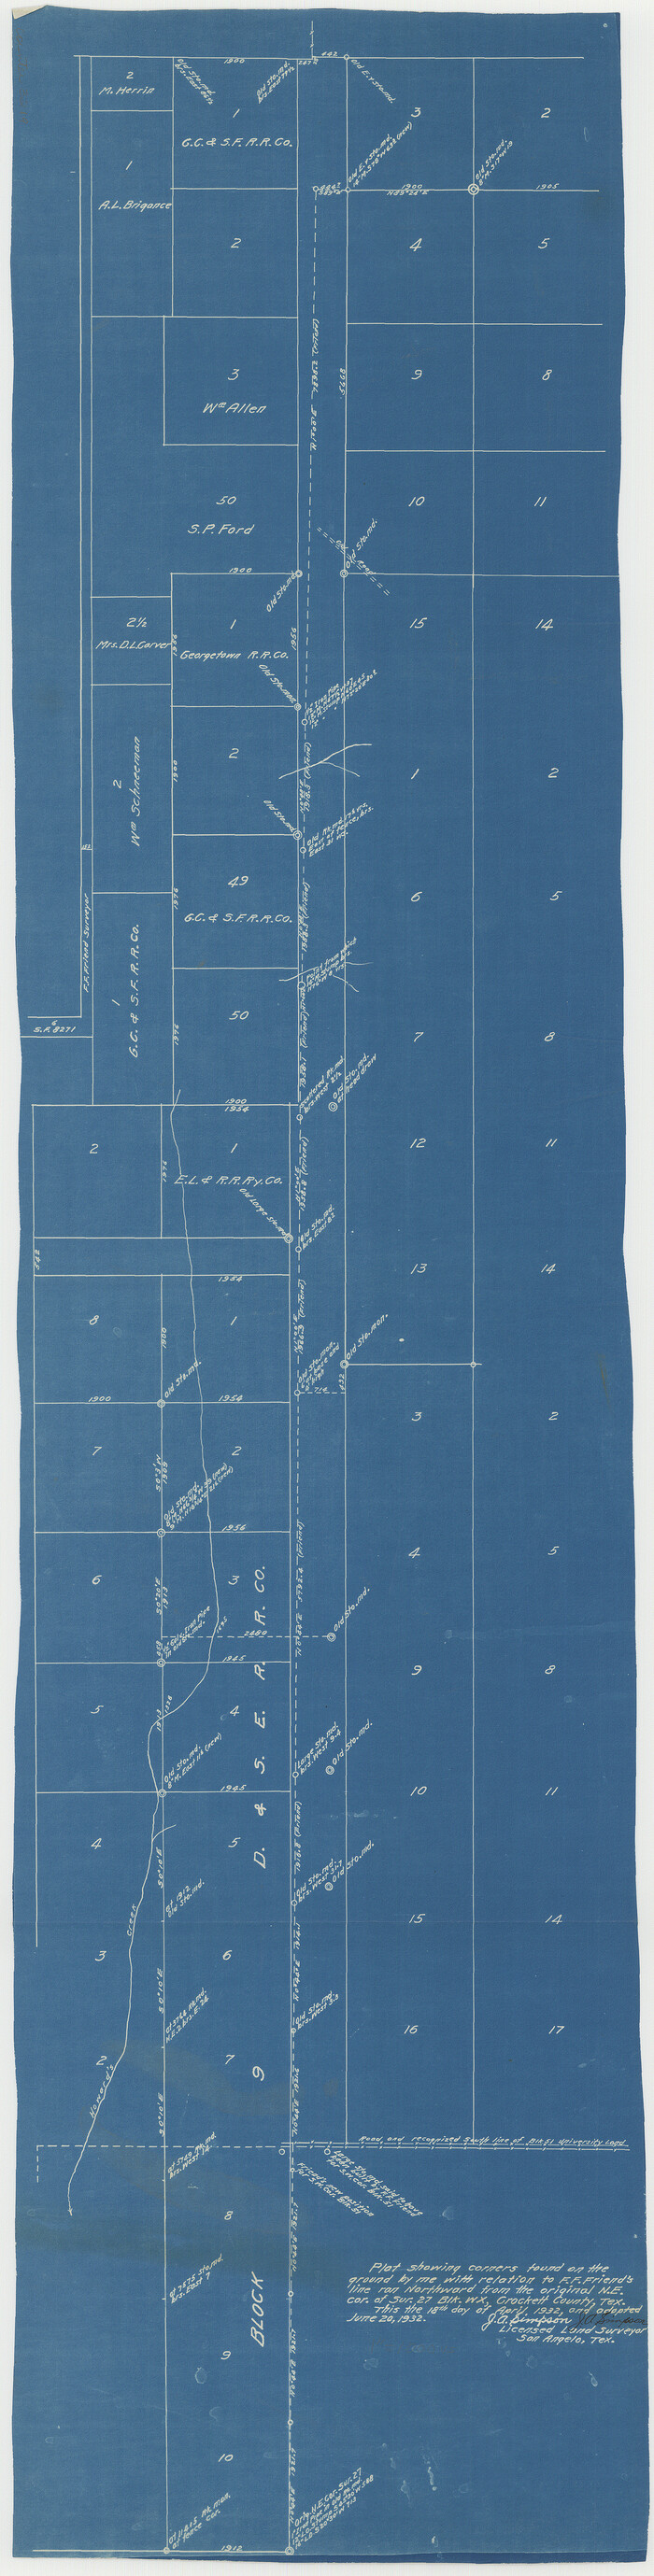 3219, [Sketch for Mineral Applications 26885-6 - Reagan and Crockett Cos., W. H. Bland], General Map Collection